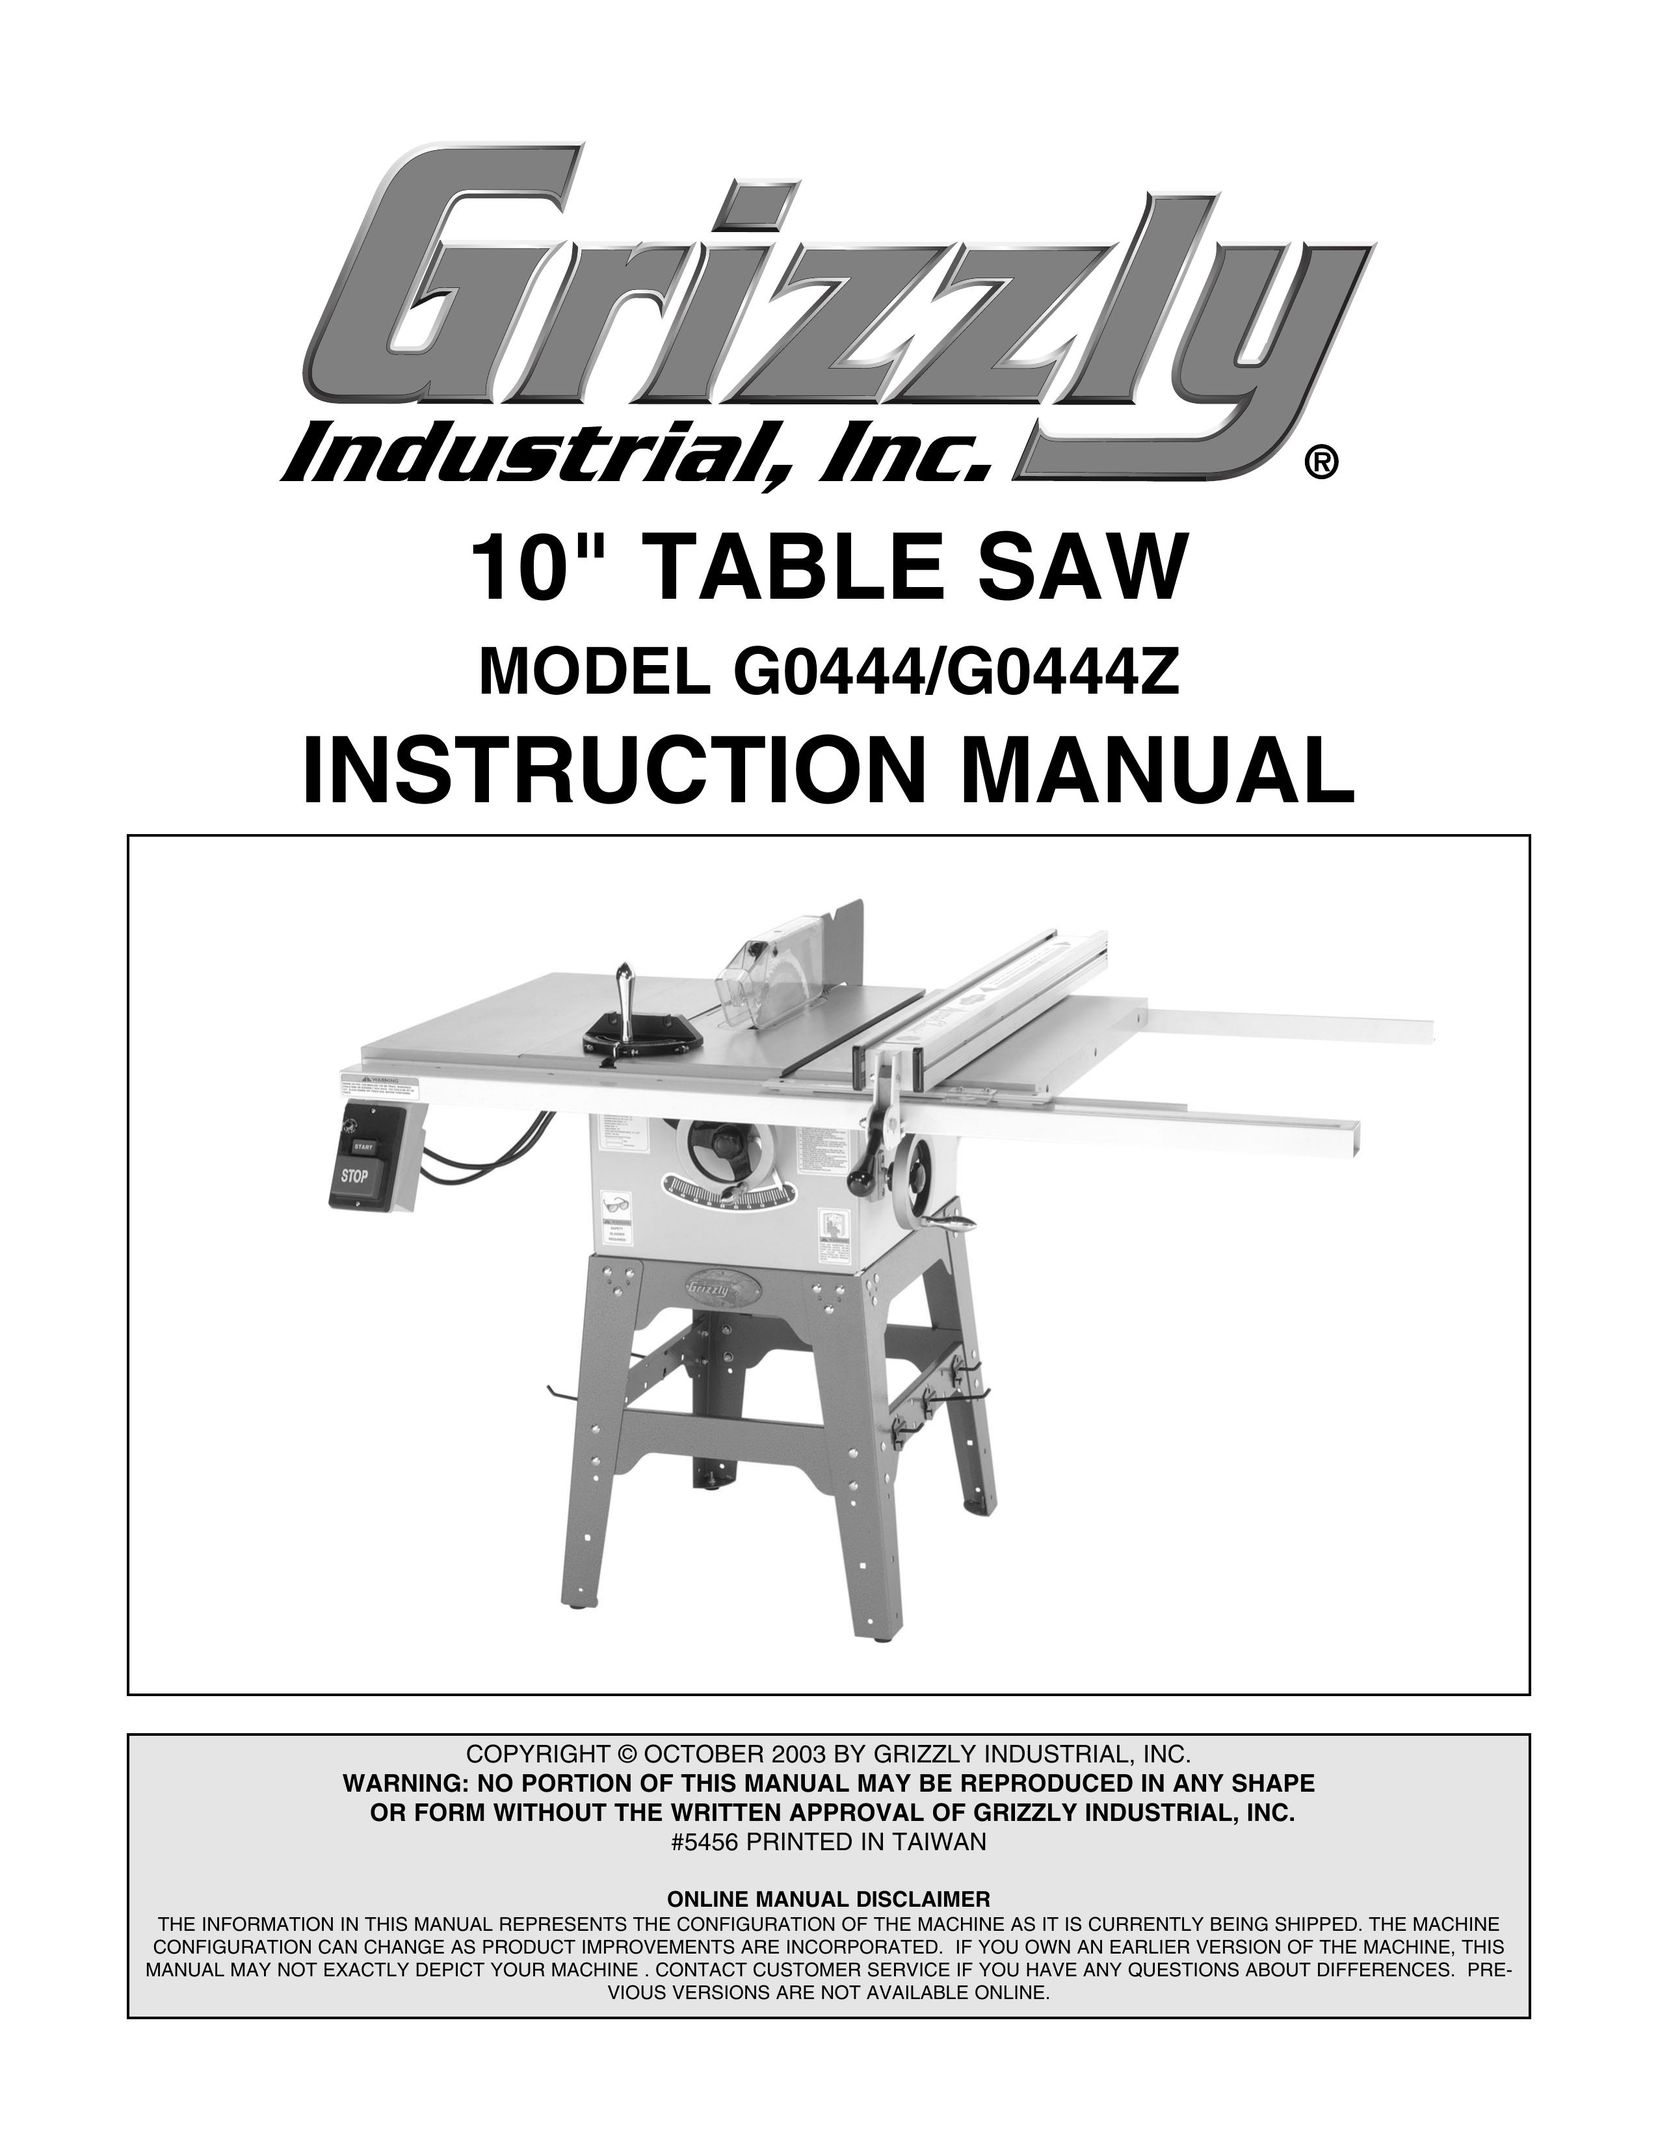 Grizzly G0444 Saw User Manual